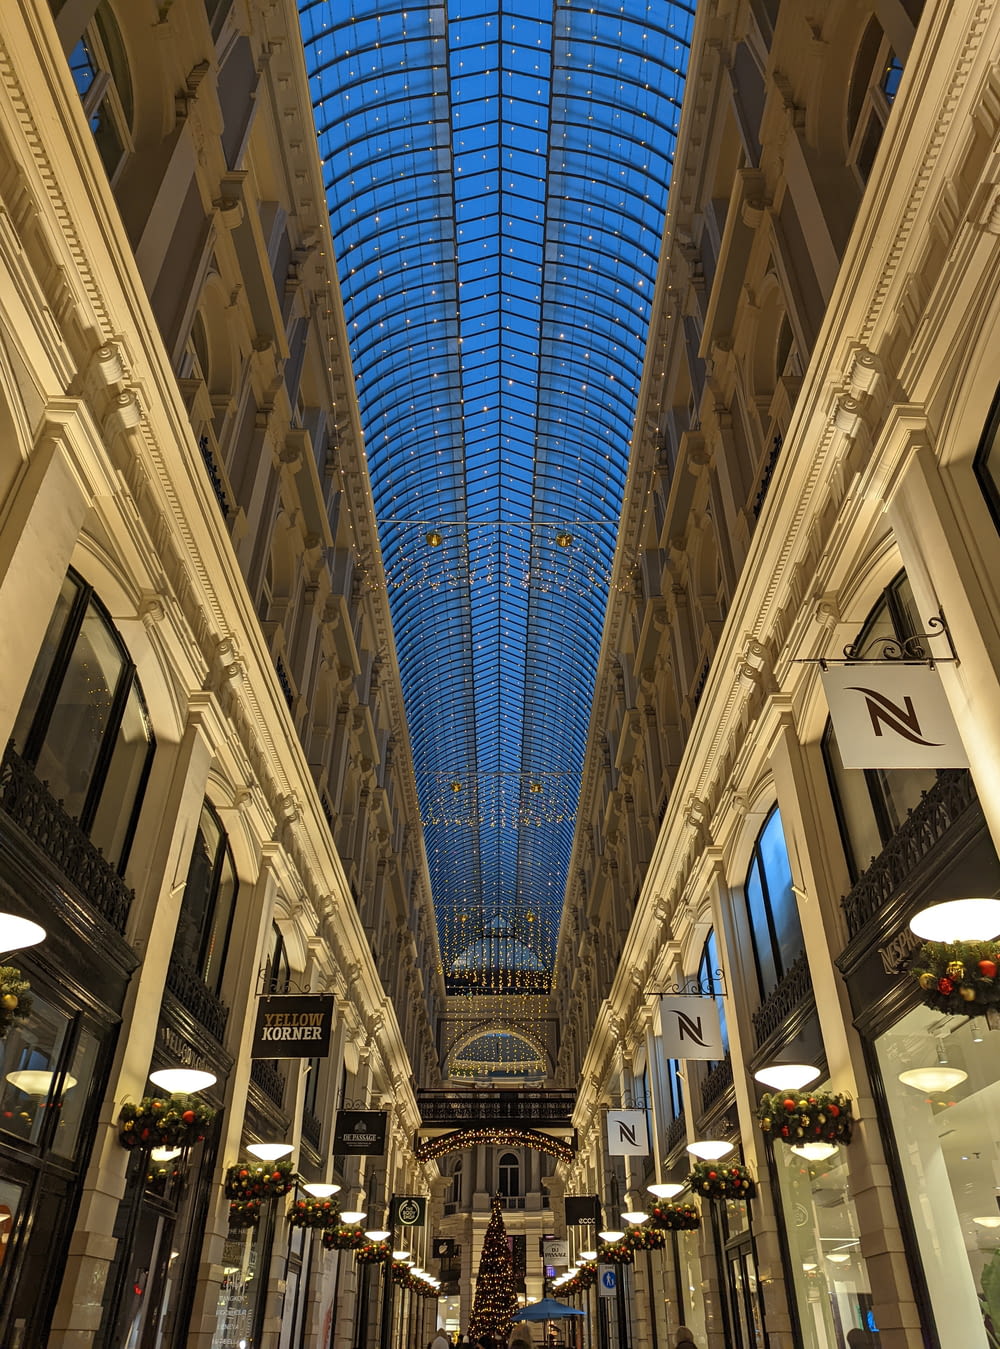 a view of a shopping mall with a skylight overhead